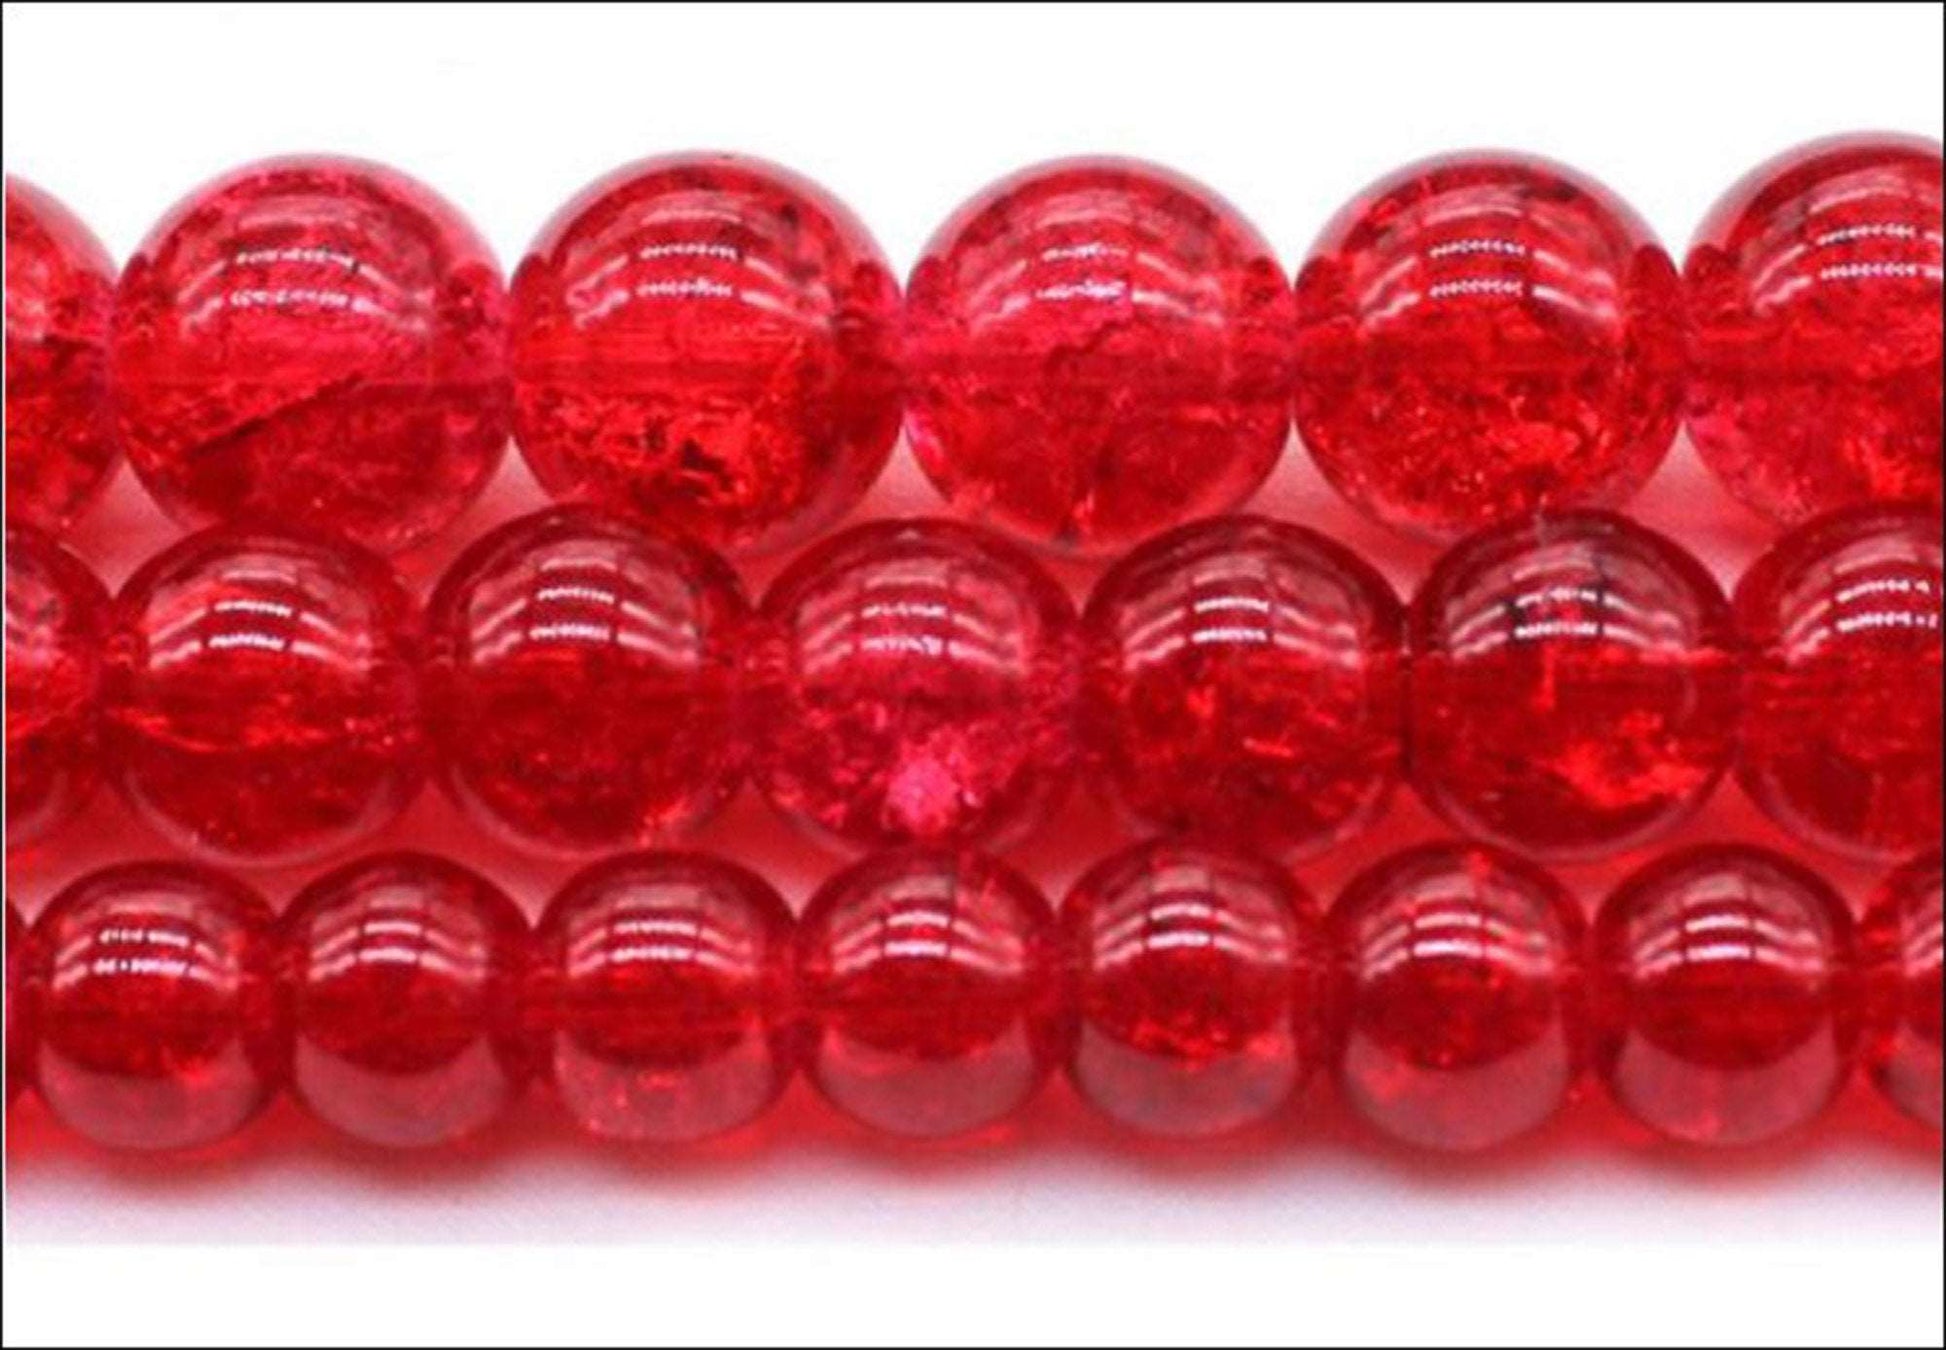 Genuine glass crackled glass bead 20/pkg. 9 colors - Providence silver gold jewelry usa